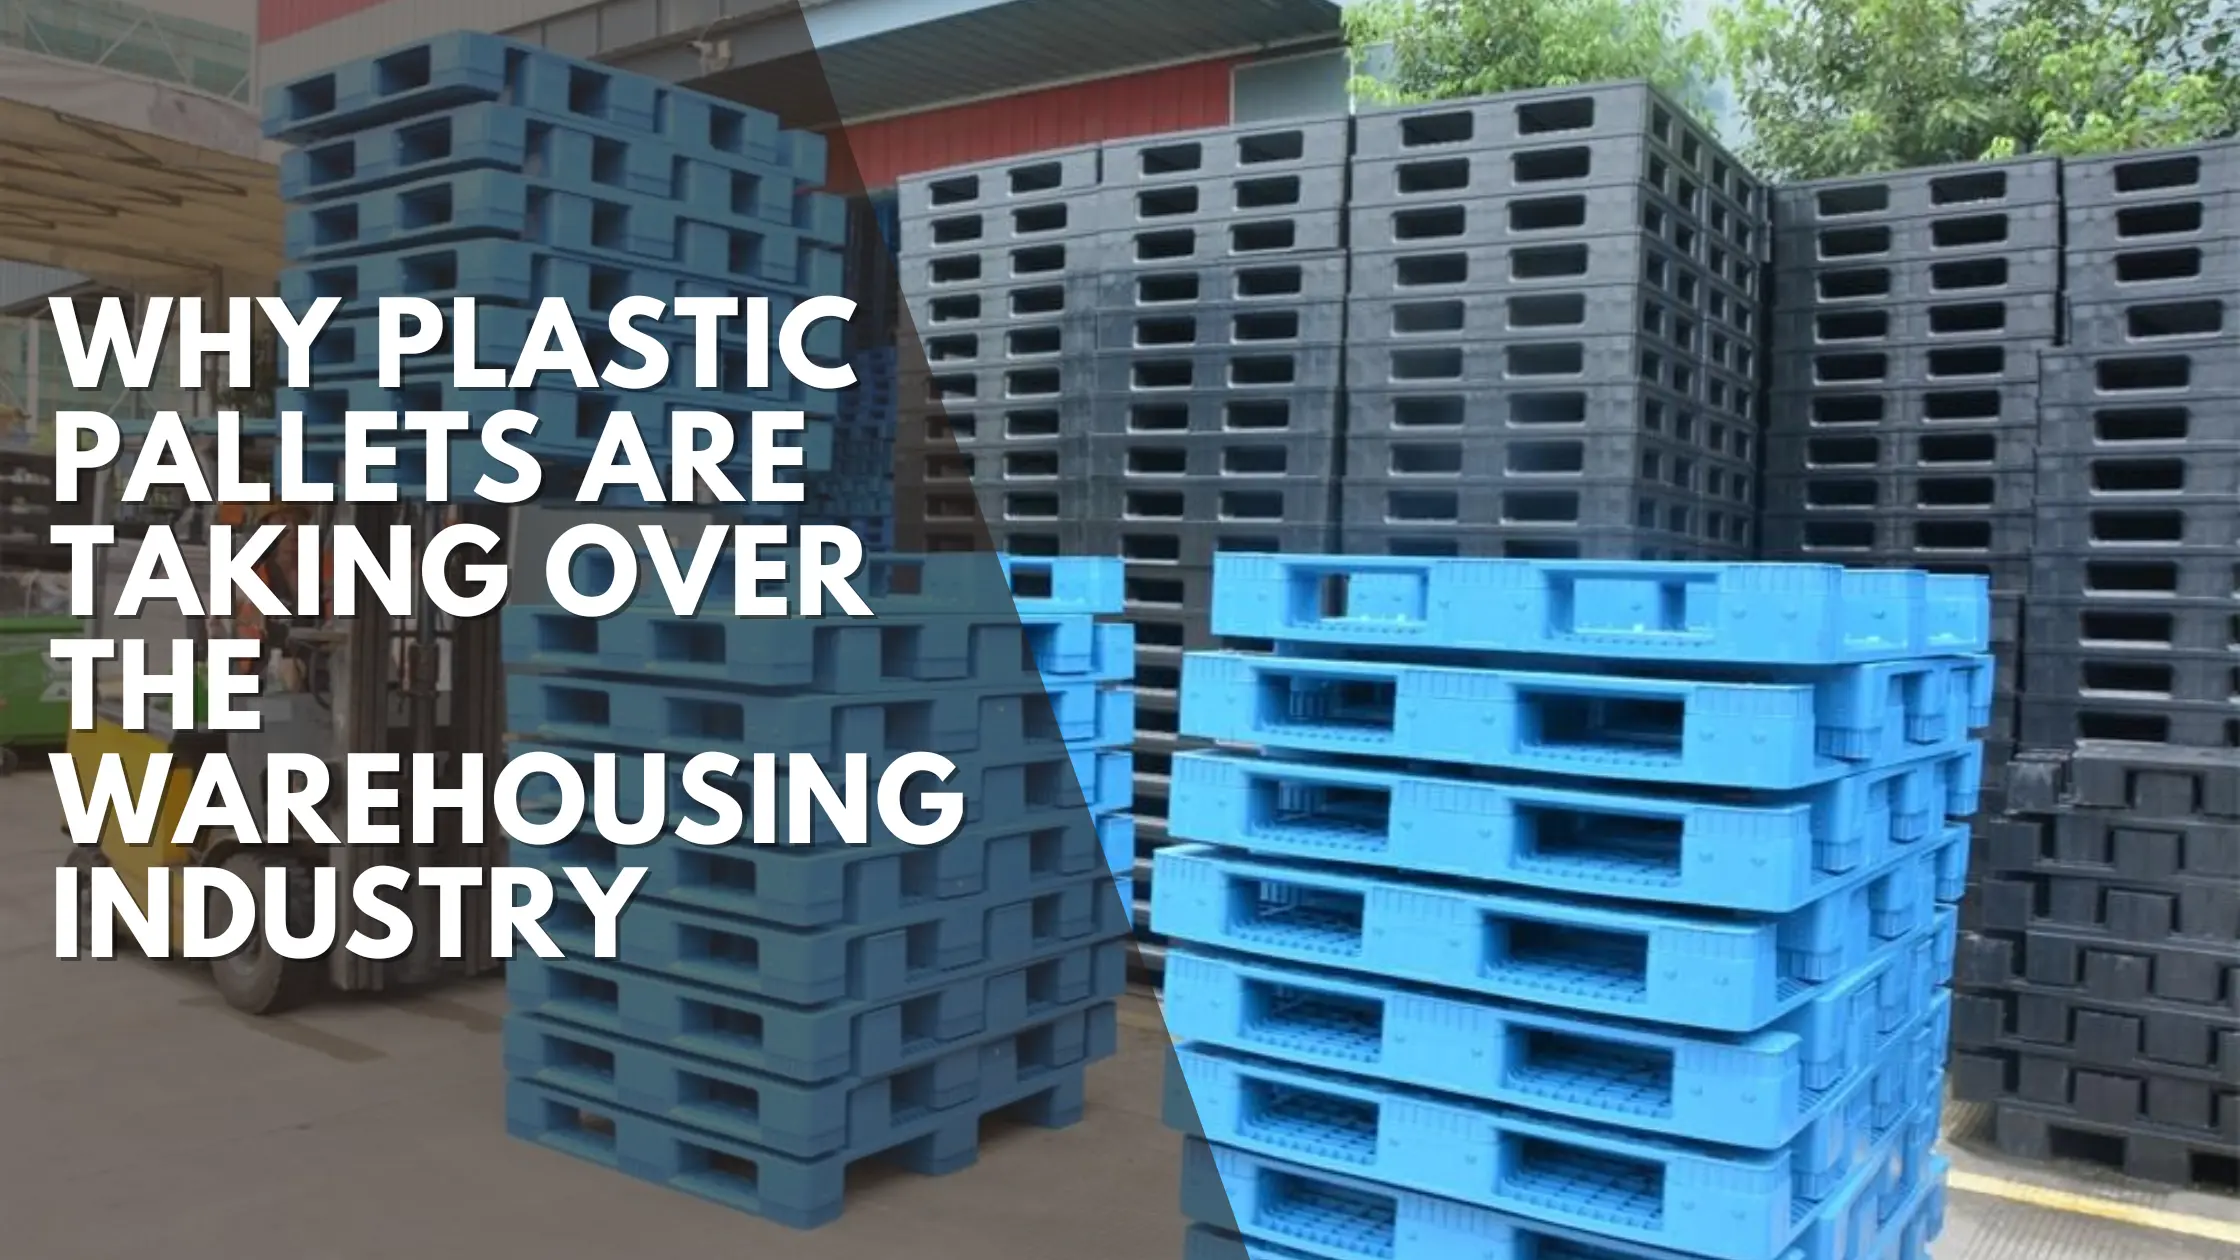 Why Plastic Pallets Are Taking Over the Warehousing Industry?